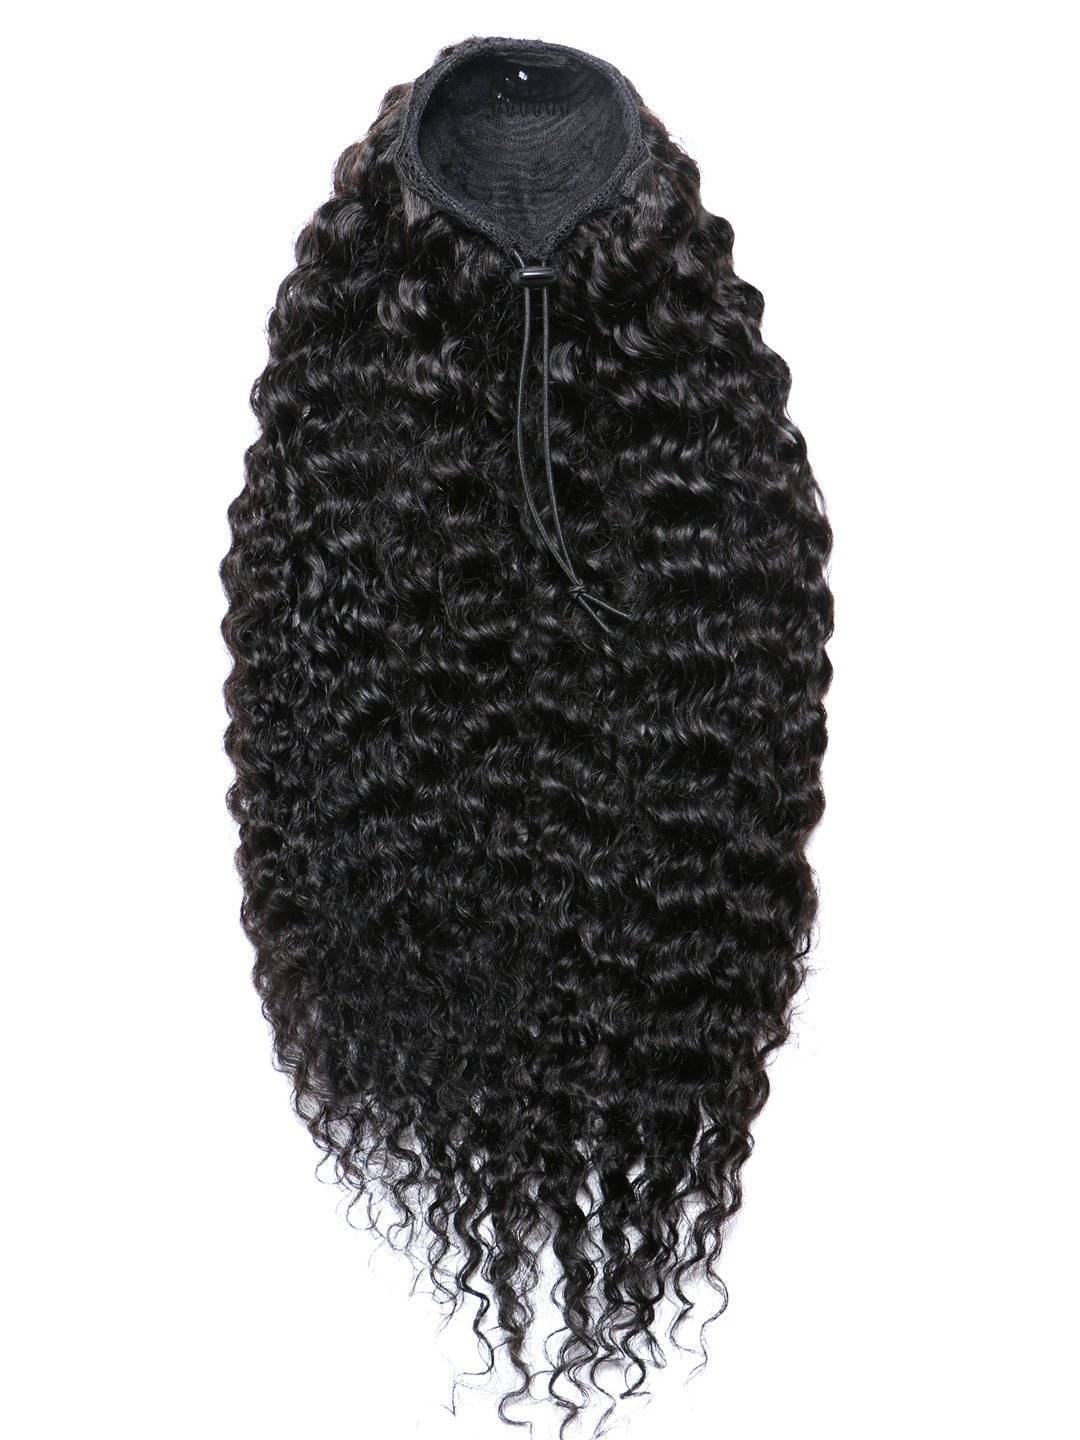 Add spiral curls to your ponytail style with Remix Coil Curl